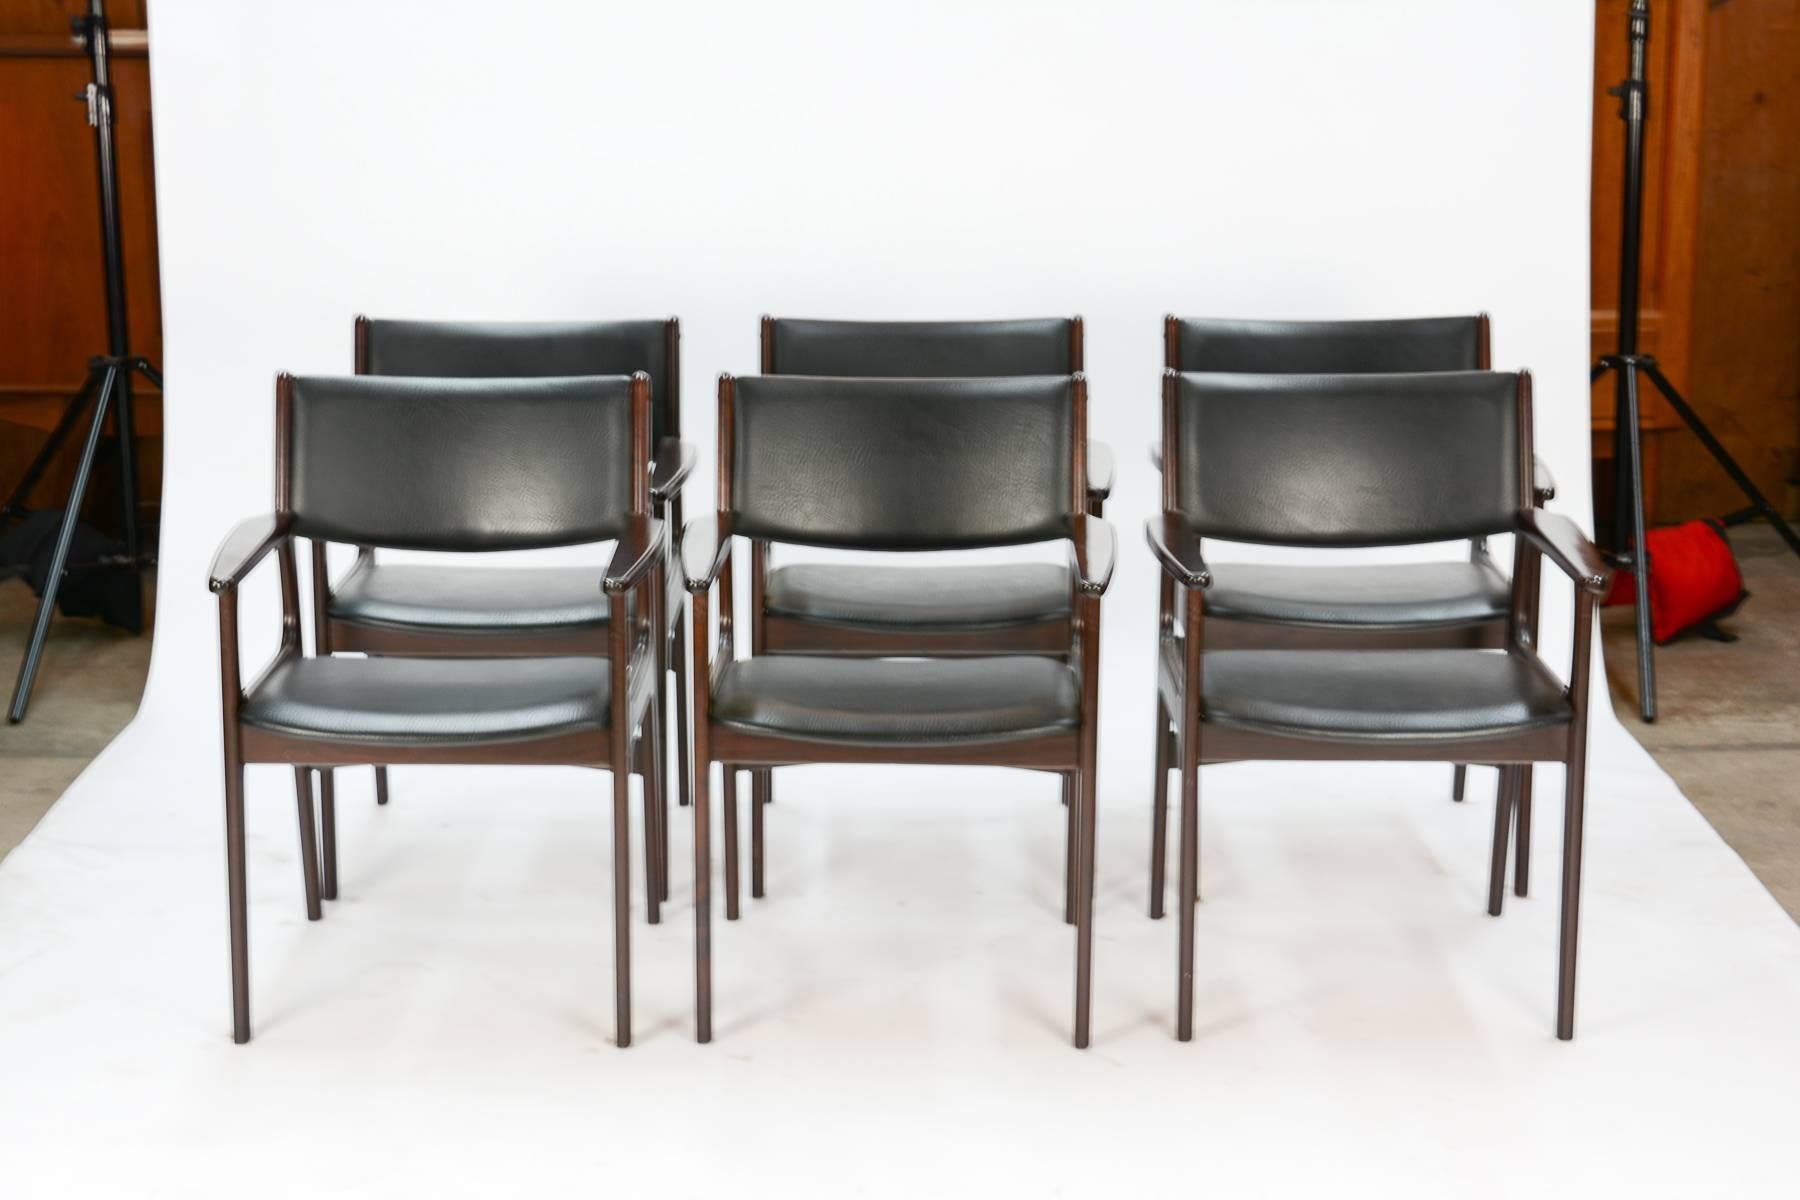 A Classic and stately armchair by Danish Mid-Century designer Erik Buch (often referenced as Erik Buck in Great Britain and the U.S.) In rosewood with original black leather upholstery.

Listed price is for set of six. Also available in pairs.